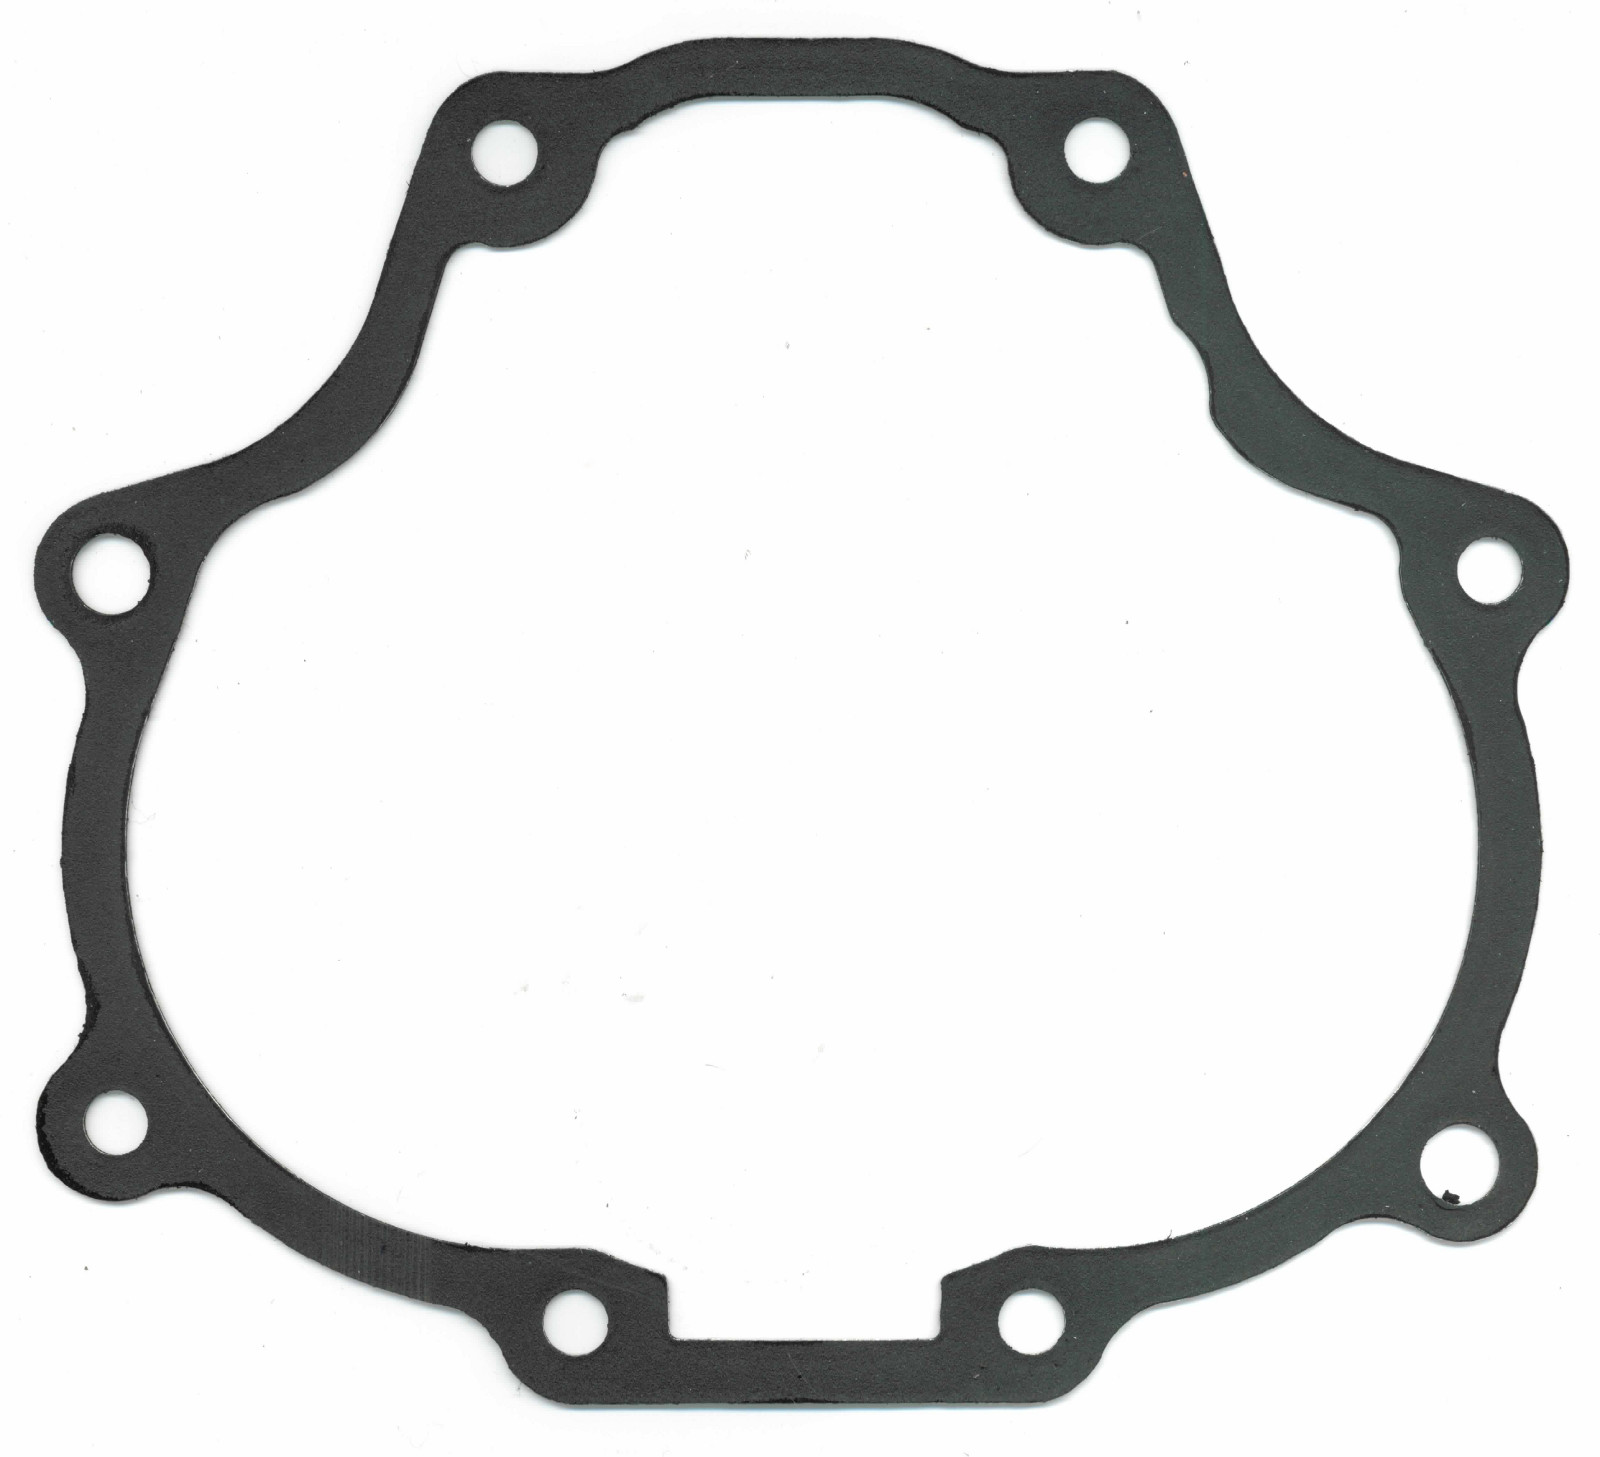 10 Pack Transmission Bearing Housing Gasket Replaces 35654-06 - Harley Dyna & Twin Cam - Click Image to Close